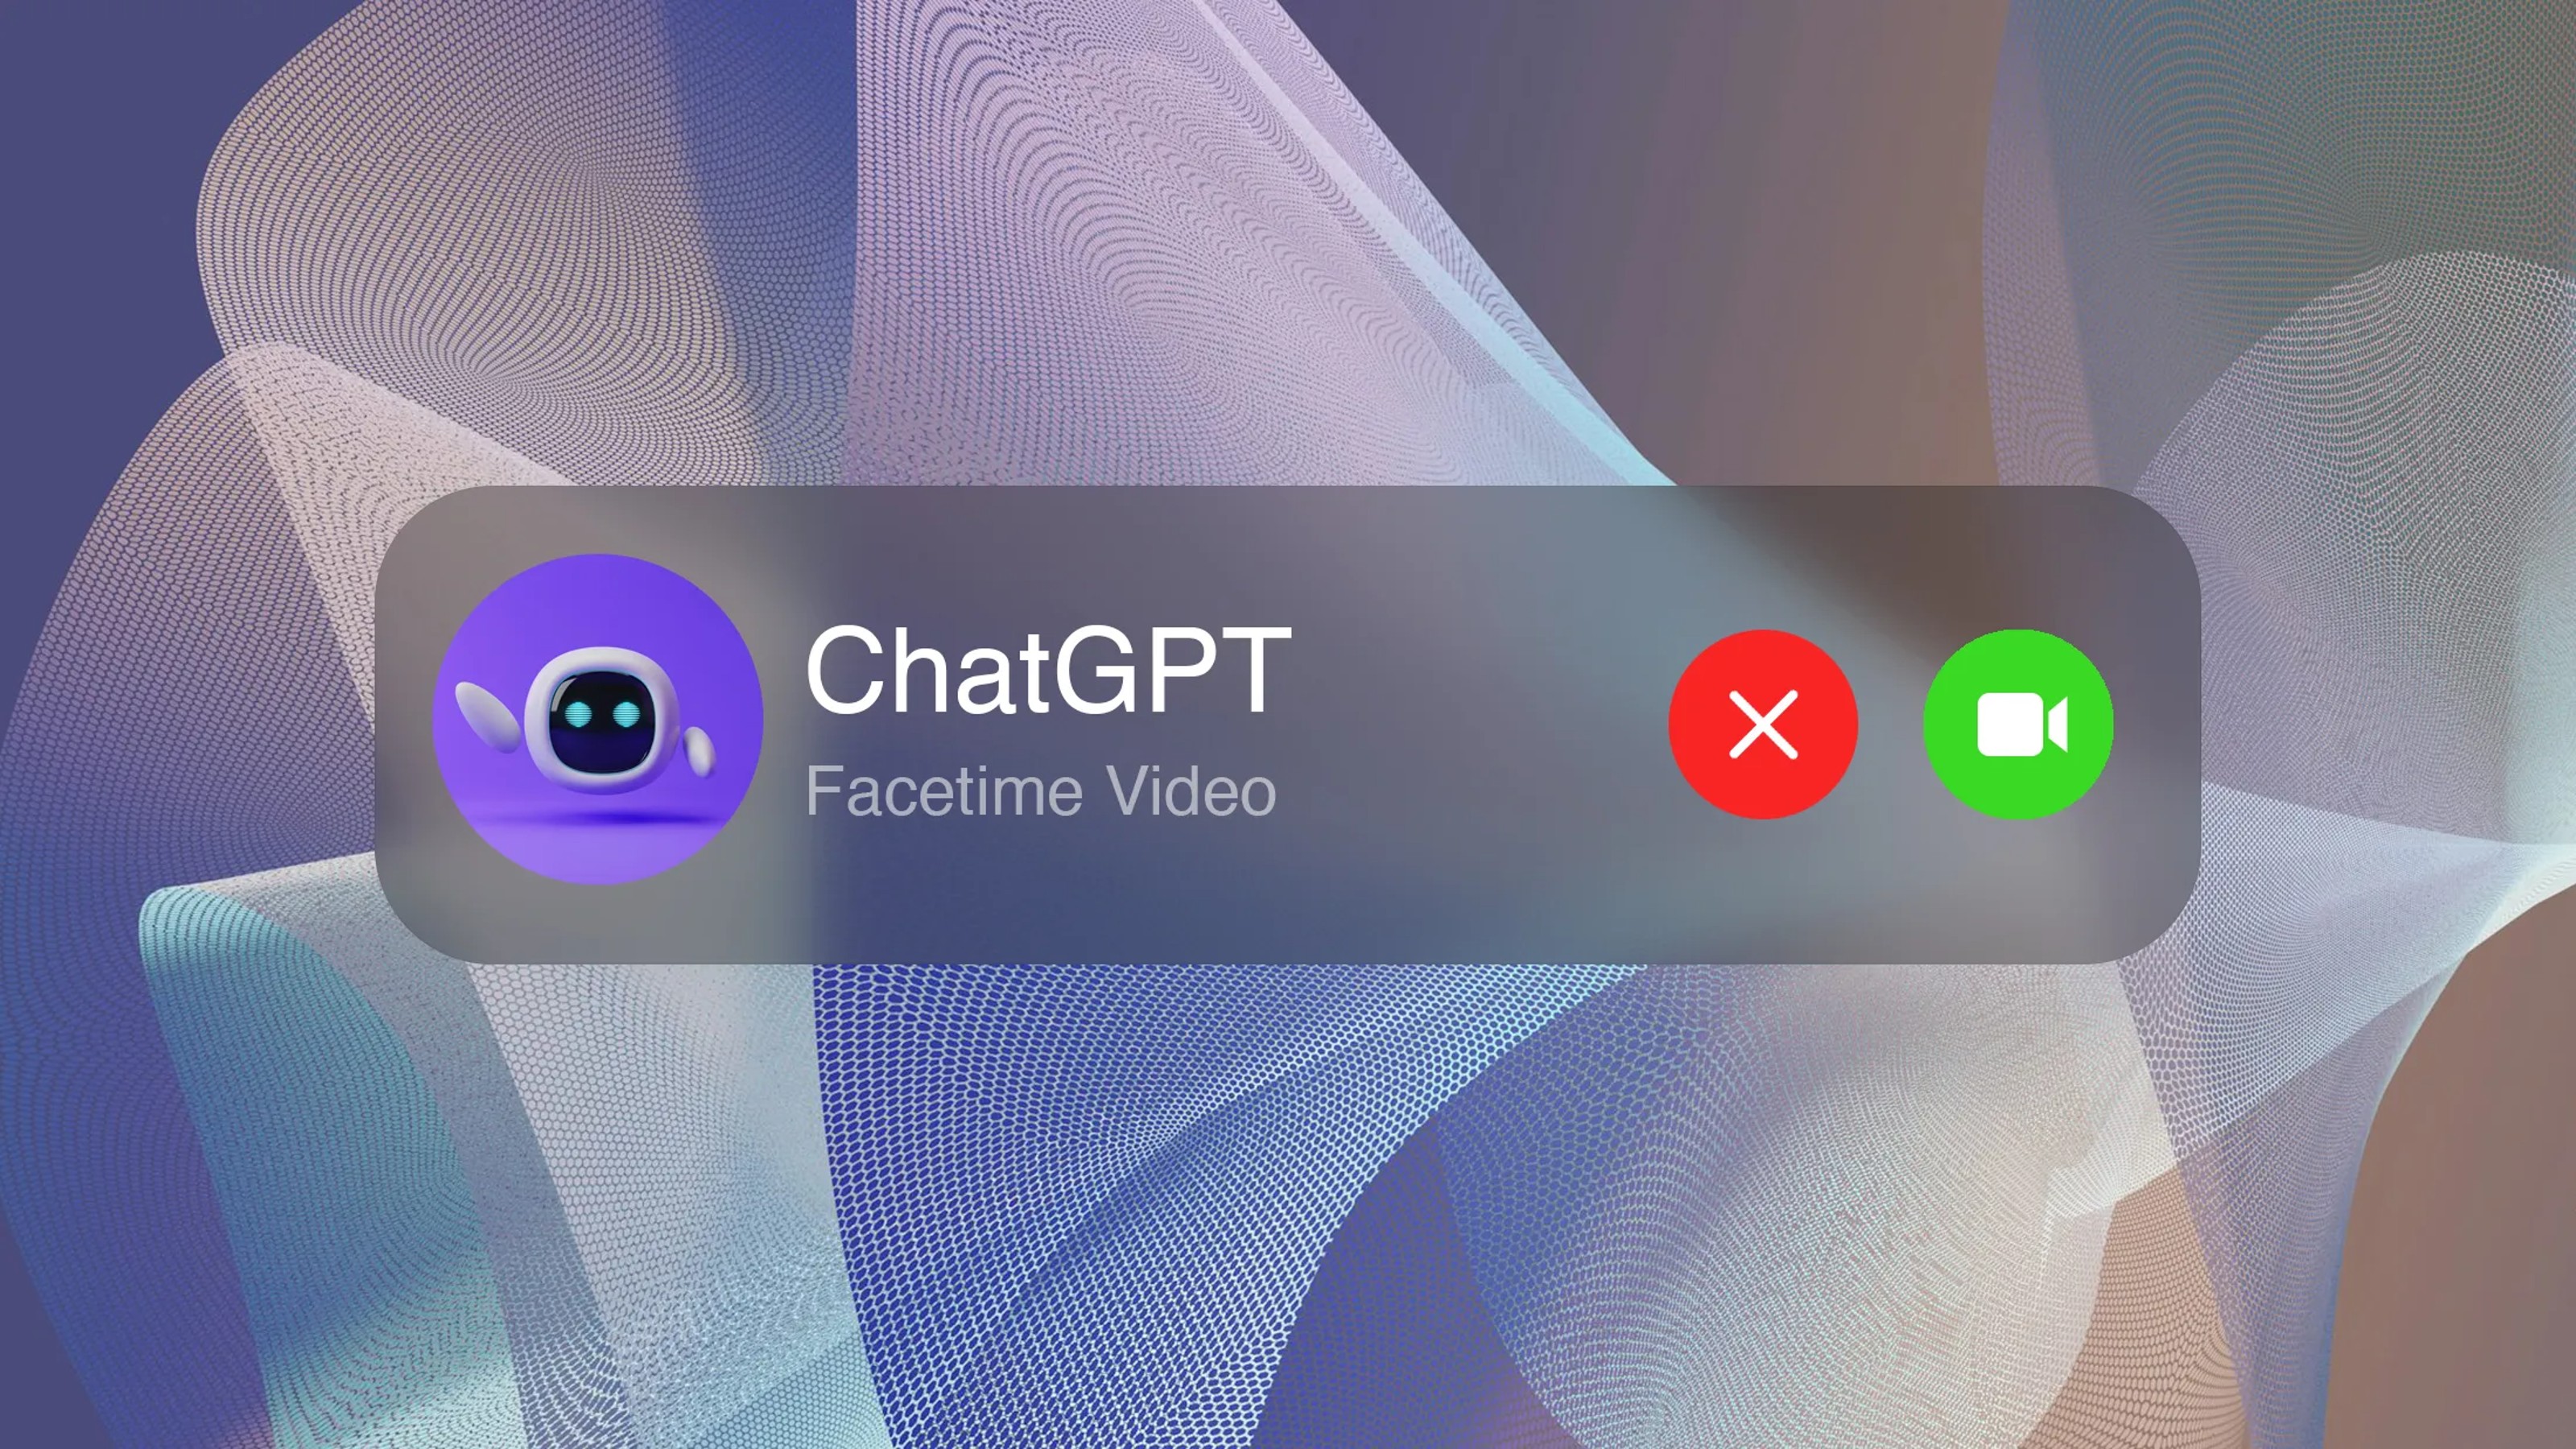 A Facetime Video call screen showing an incoming call from "ChatGPT" with an AI icon, featuring a red decline button and a green accept button.